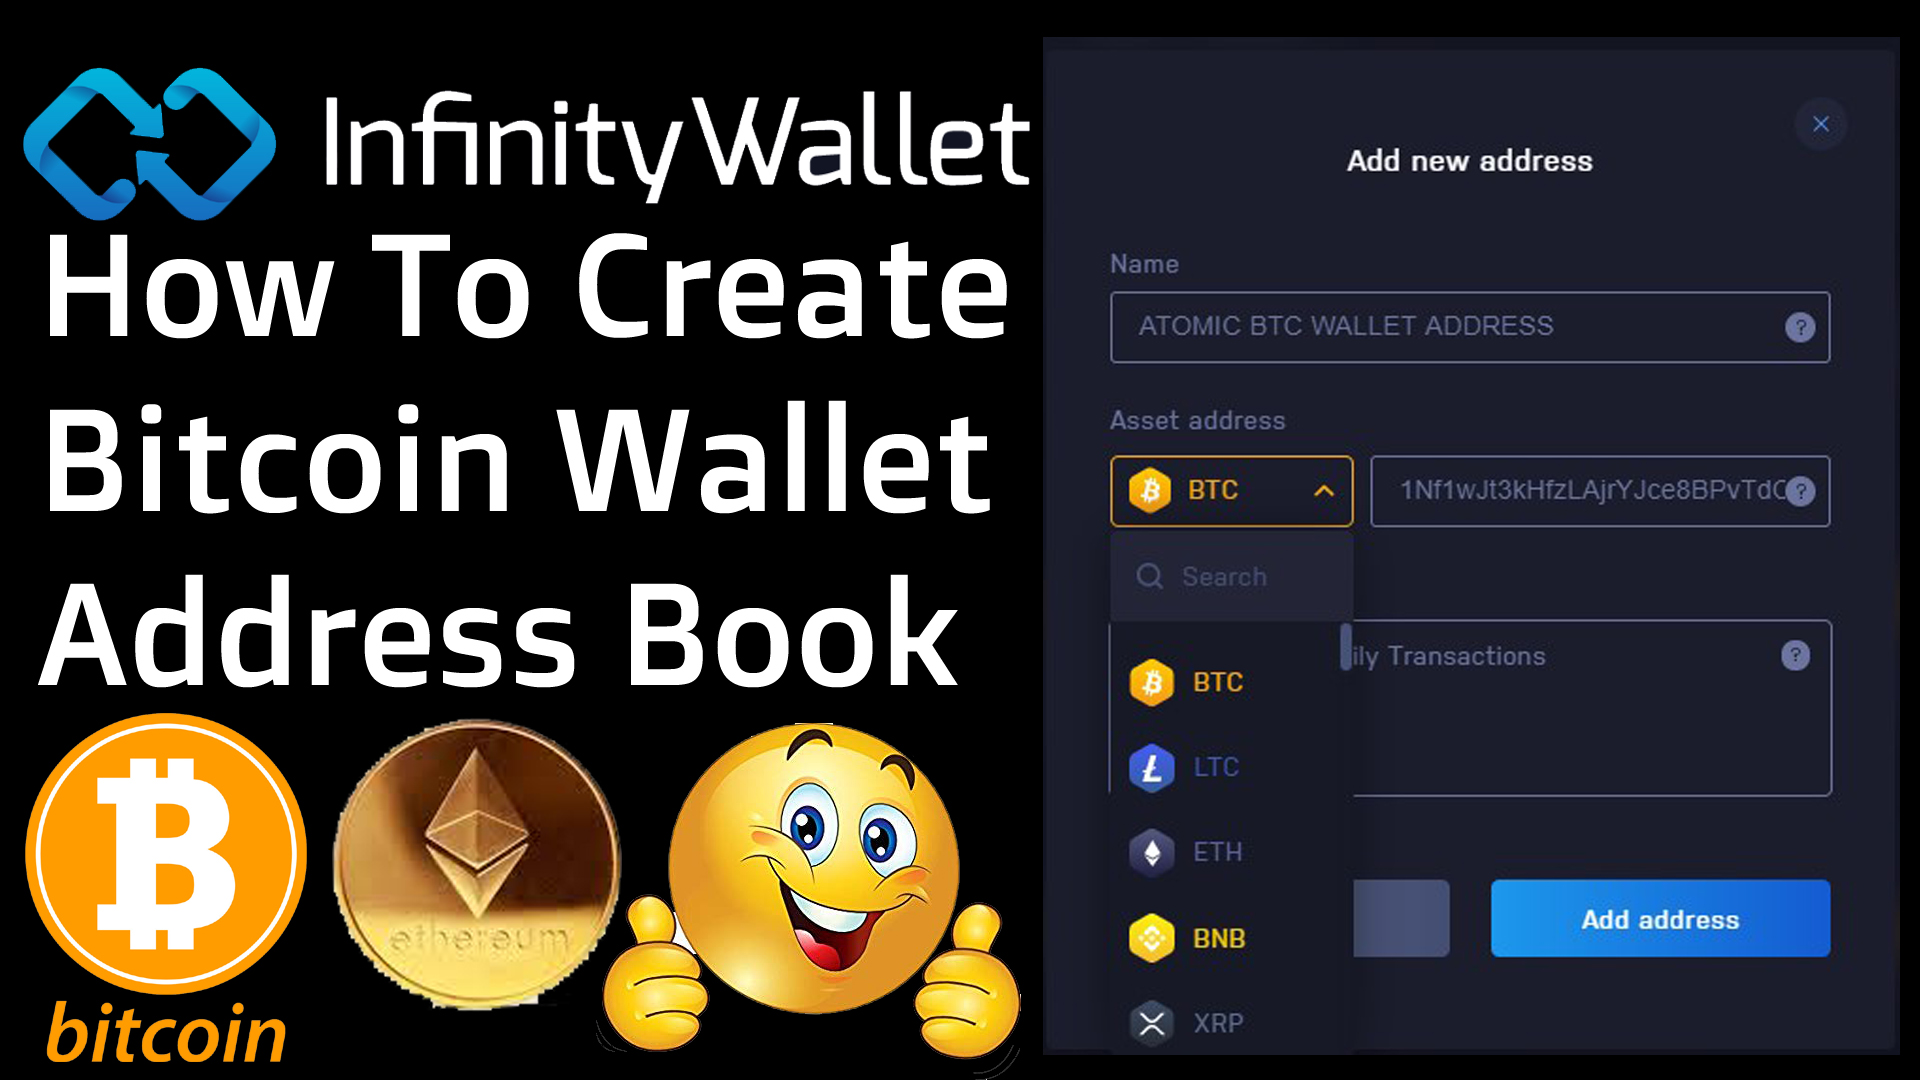 How To Create Bitcoin Wallet Address Book in Infinity Wallet by Crypto Wallets Info.jpg